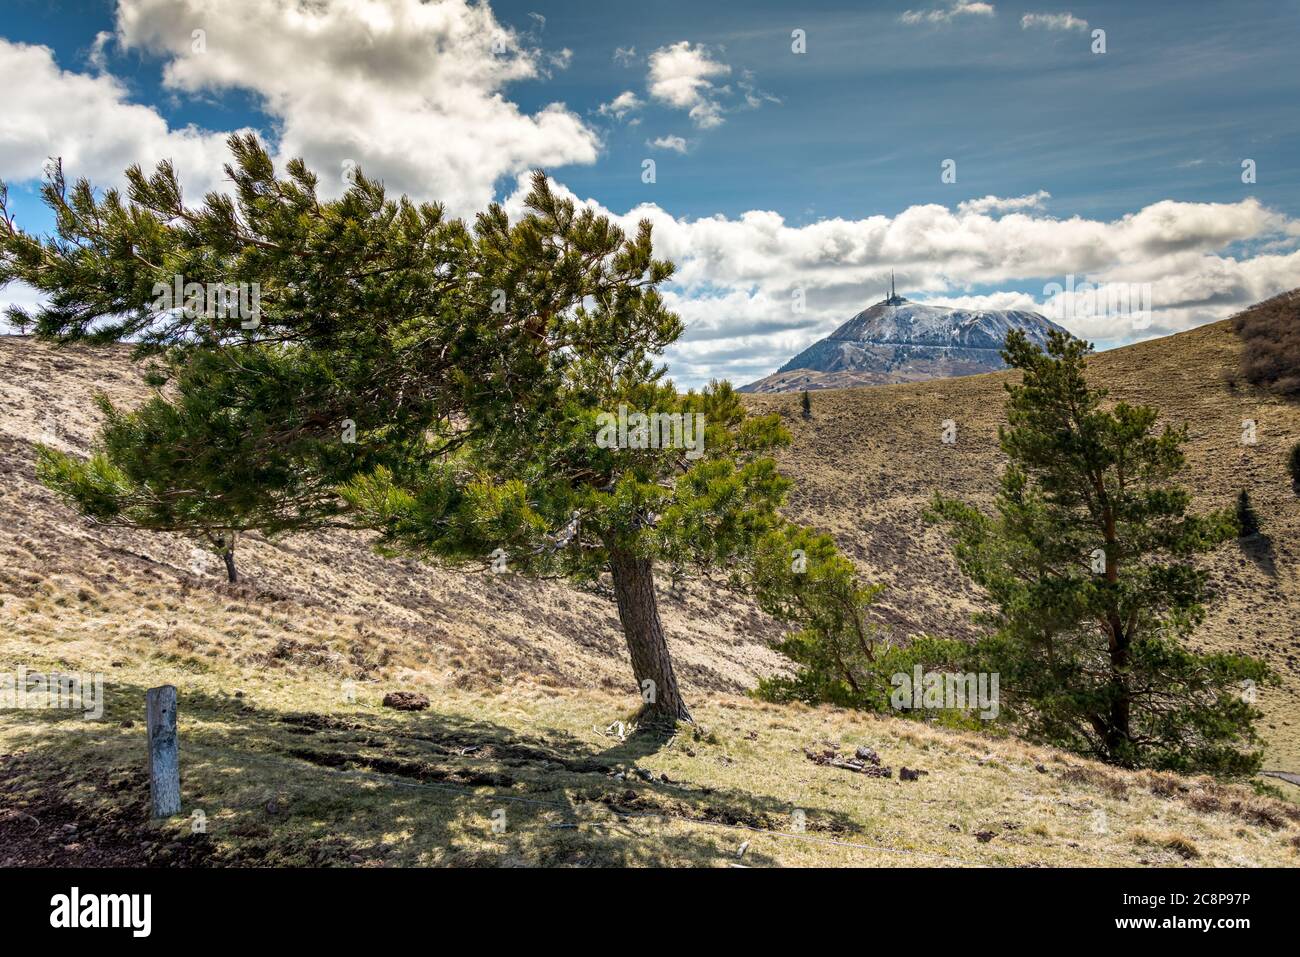 Incredible view of the Puy de Dome from the crater of nid de poule, Auvergne France Stock Photo